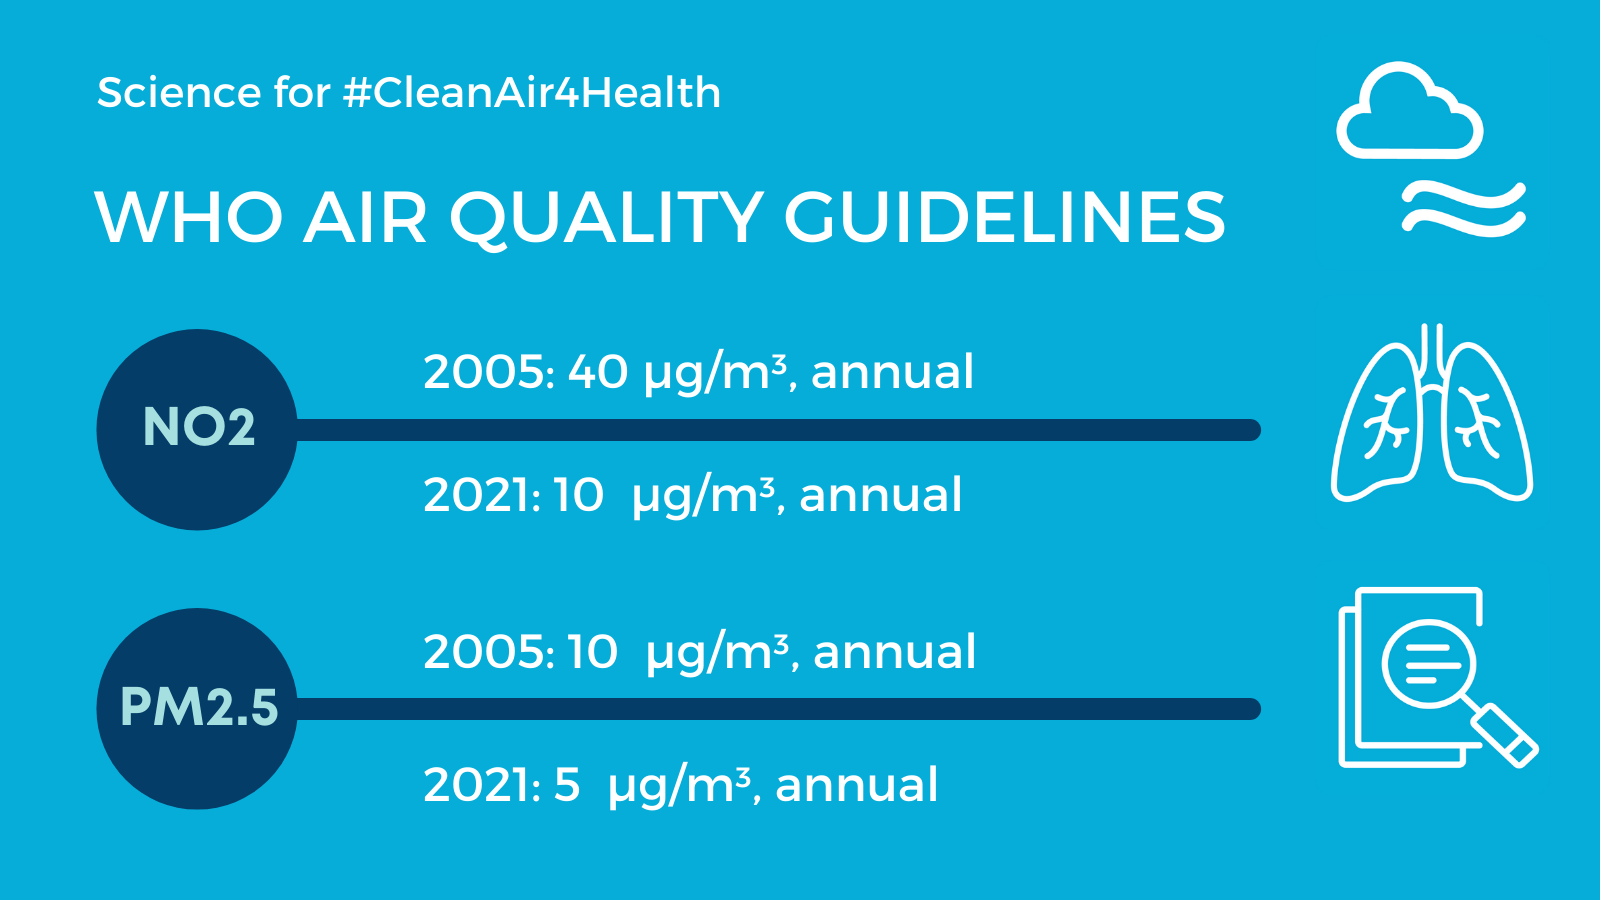 Health groups call for EU air quality standards to be fully aligned with new WHO recommendations